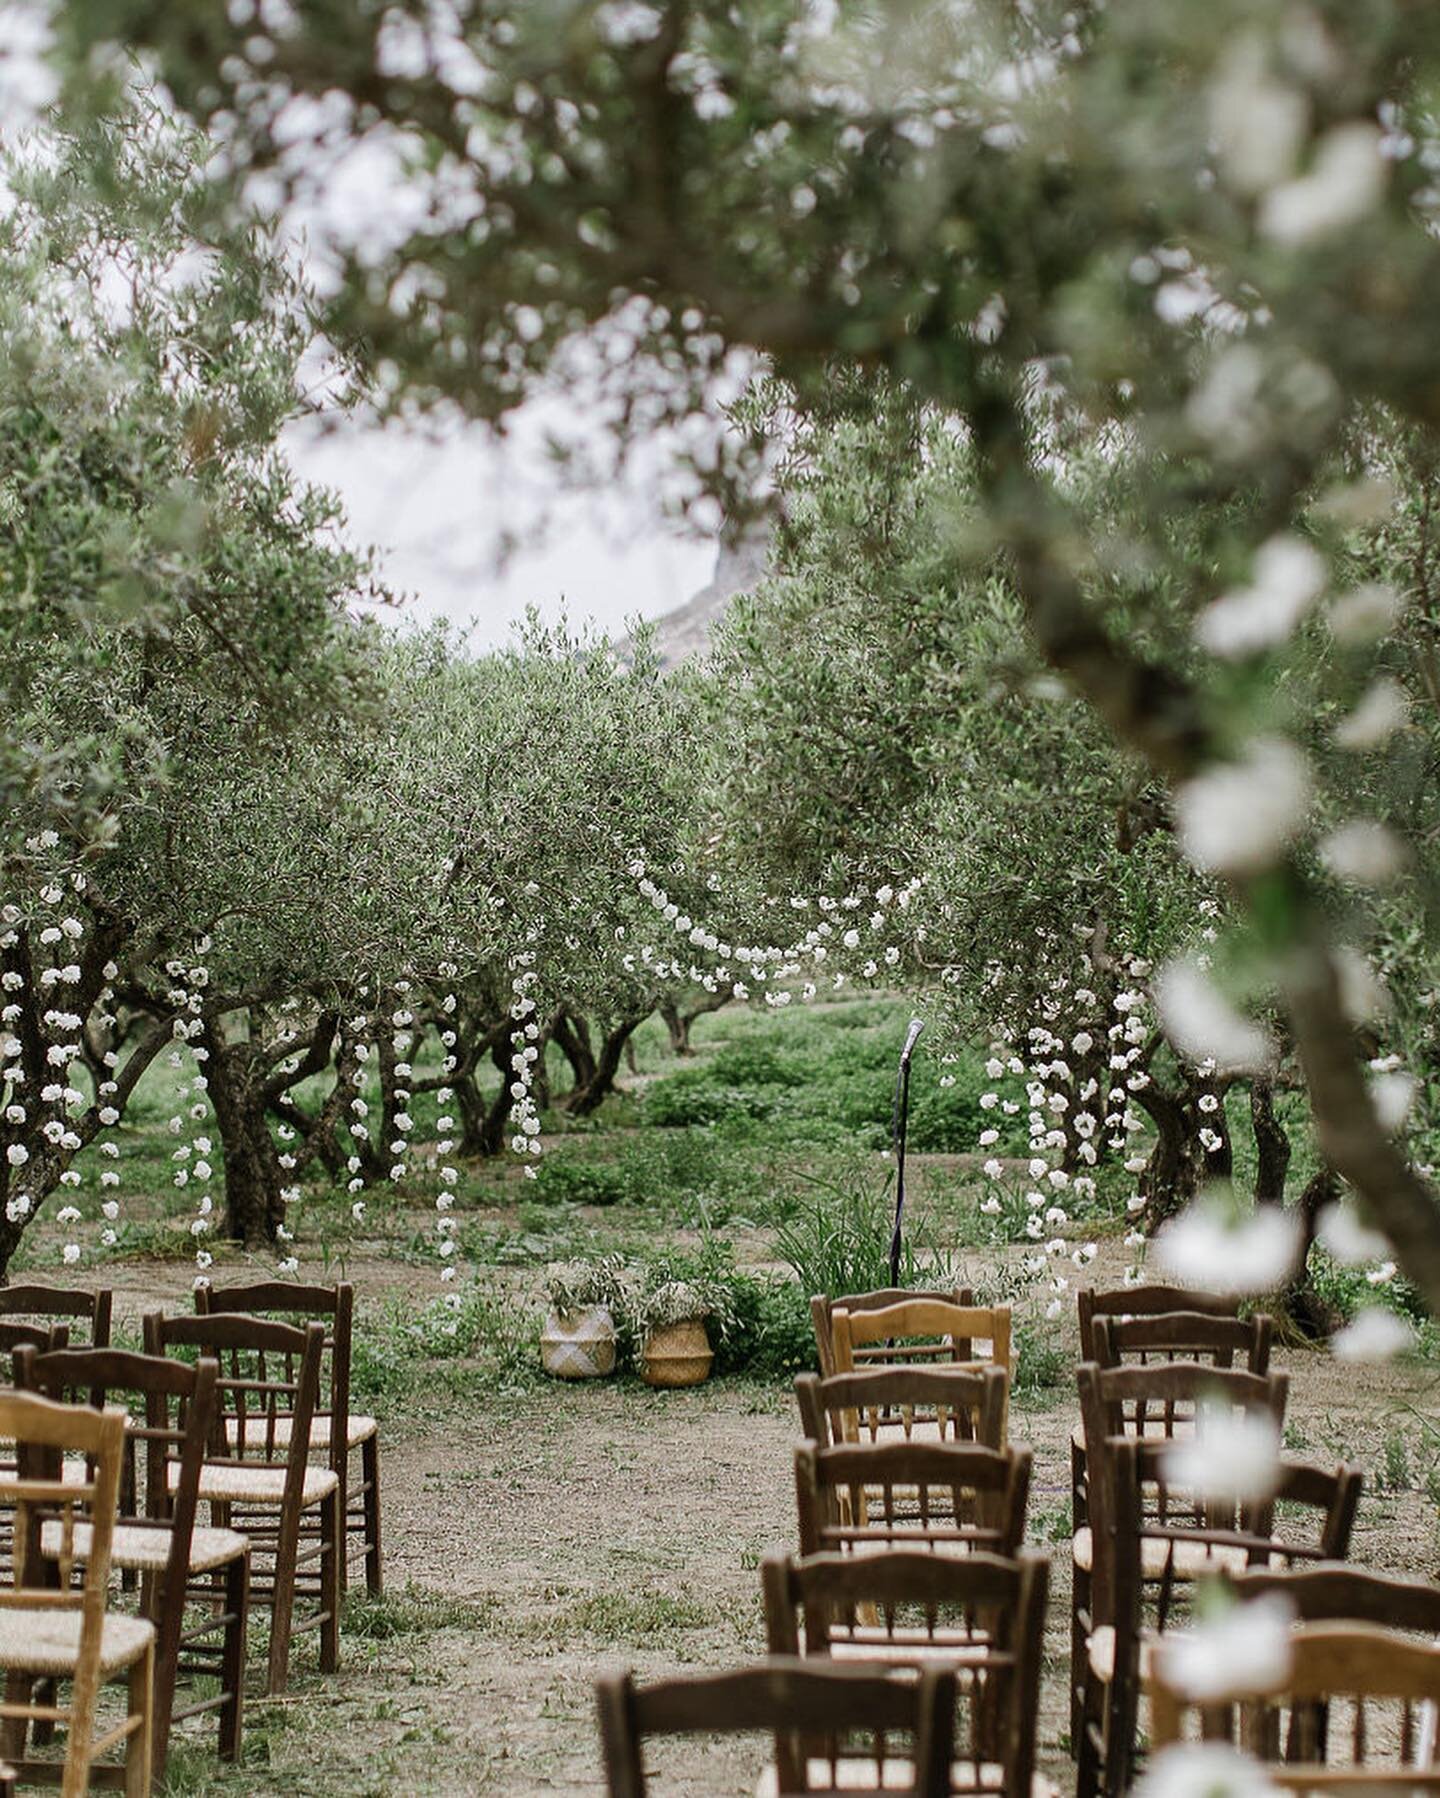 Would you say &ldquo;𝙄 𝙙𝙤&rdquo; in the midst of the breathtaking nature of Crete, surrounded by the sound of olive trees and your loved ones?
&bull;
For this wedding ceremony, we developed a minimalist styling concept and added just the right amo